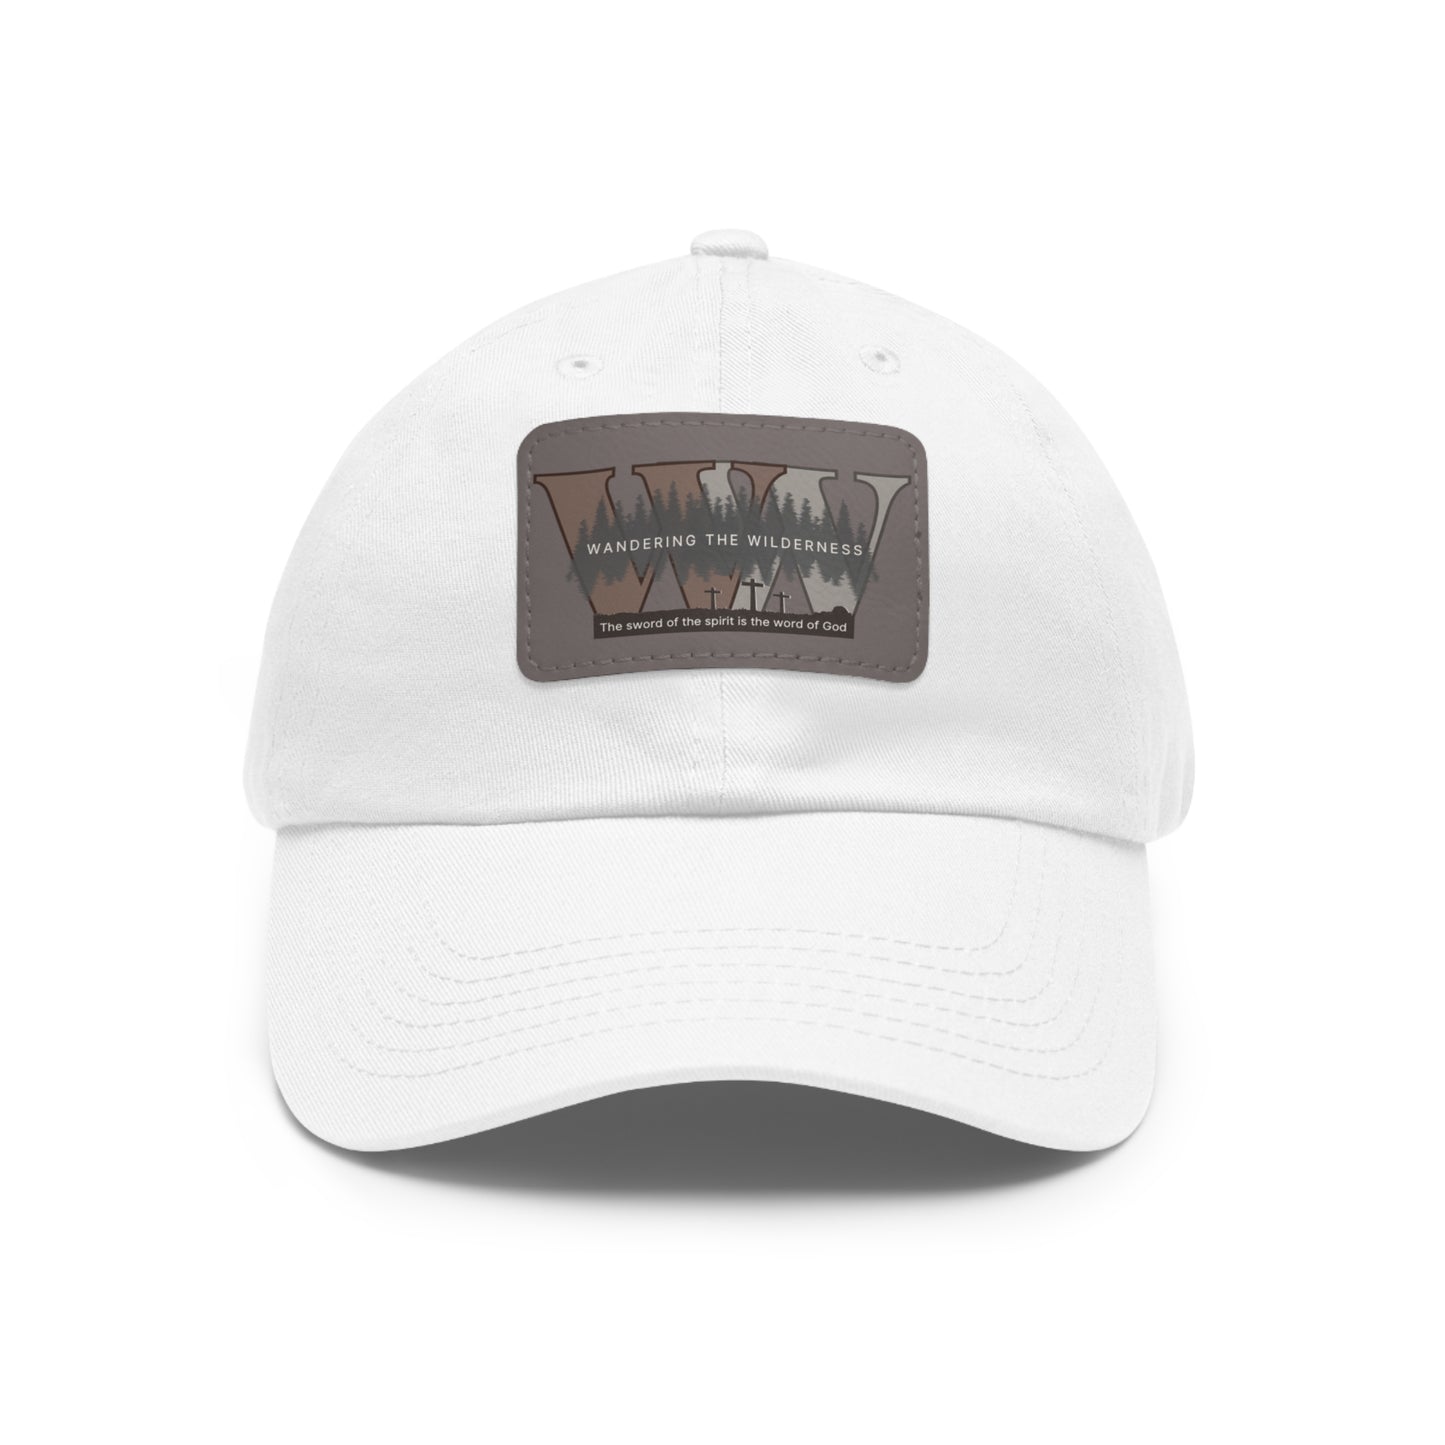 Wandering the Wilderness Dad Hat with Leather Patch.